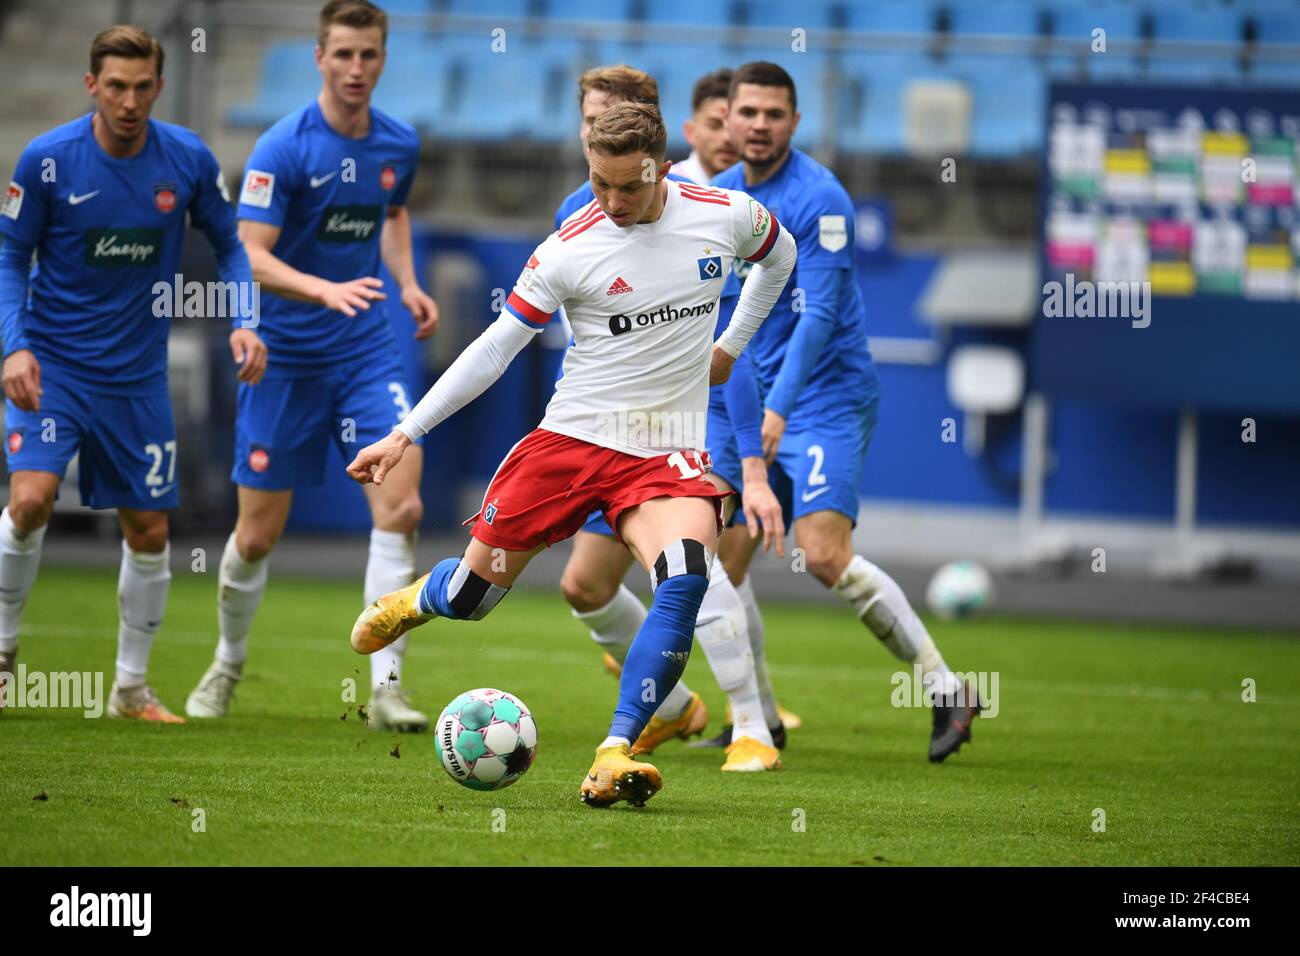 Hamburg, Germany. 20th Mar, 2021. Football: 2. Bundesliga, Matchday 26: Hamburger SV - 1. FC Heidenheim at Volksparkstadion. Hamburg's Sonny Kittel shoots the ball just wide of the goal. Credit: Daniel Reinhardt/dpa - IMPORTANT NOTE: In accordance with the regulations of the DFL Deutsche Fußball Liga and/or the DFB Deutscher Fußball-Bund, it is prohibited to use or have used photographs taken in the stadium and/or of the match in the form of sequence pictures and/or video-like photo series./dpa/Alamy Live News Stock Photo